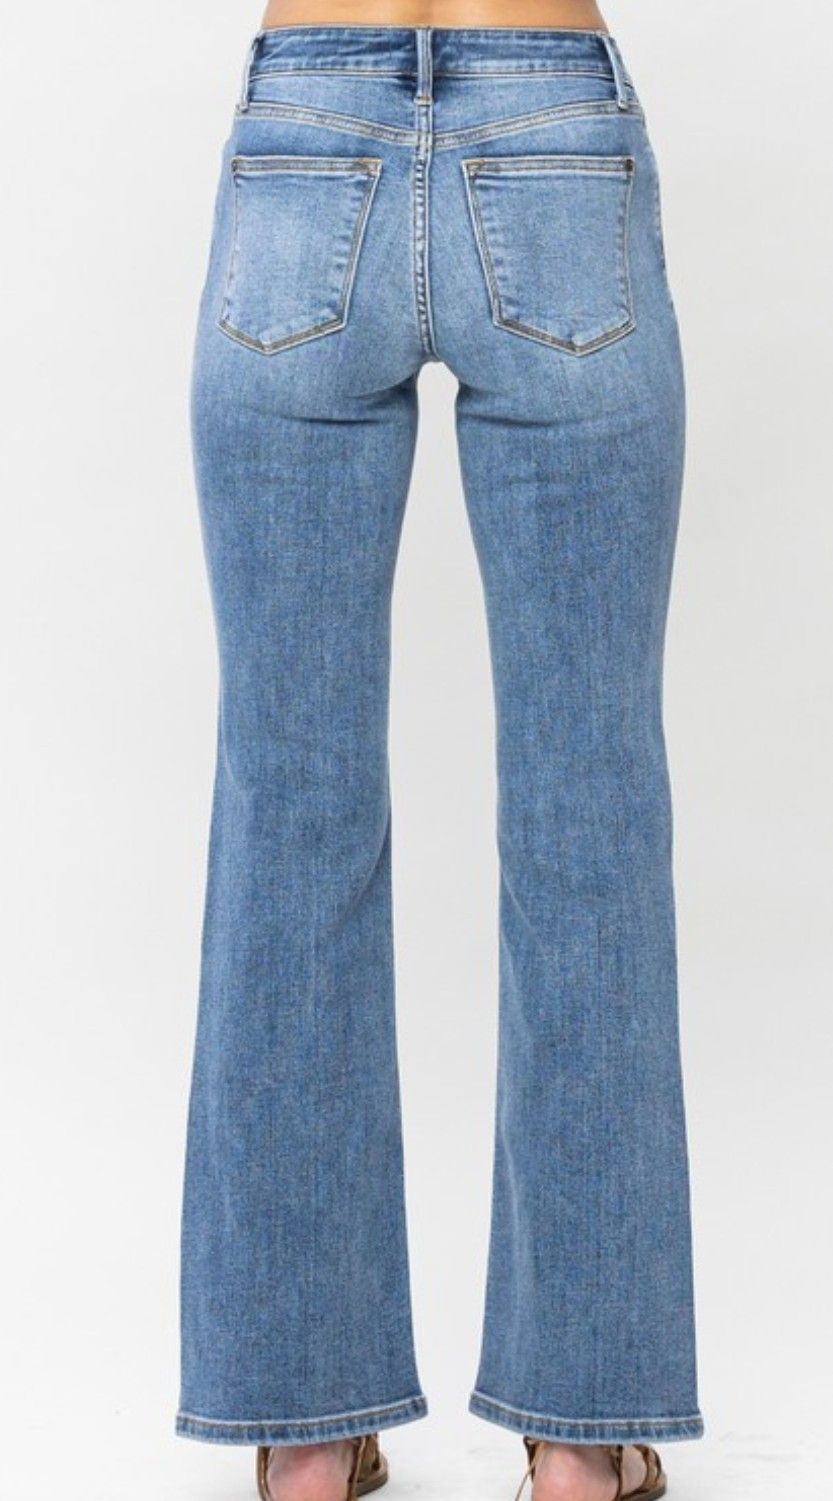 The Esti Judy Blue Jeans - Women's Collection - In Store & Online